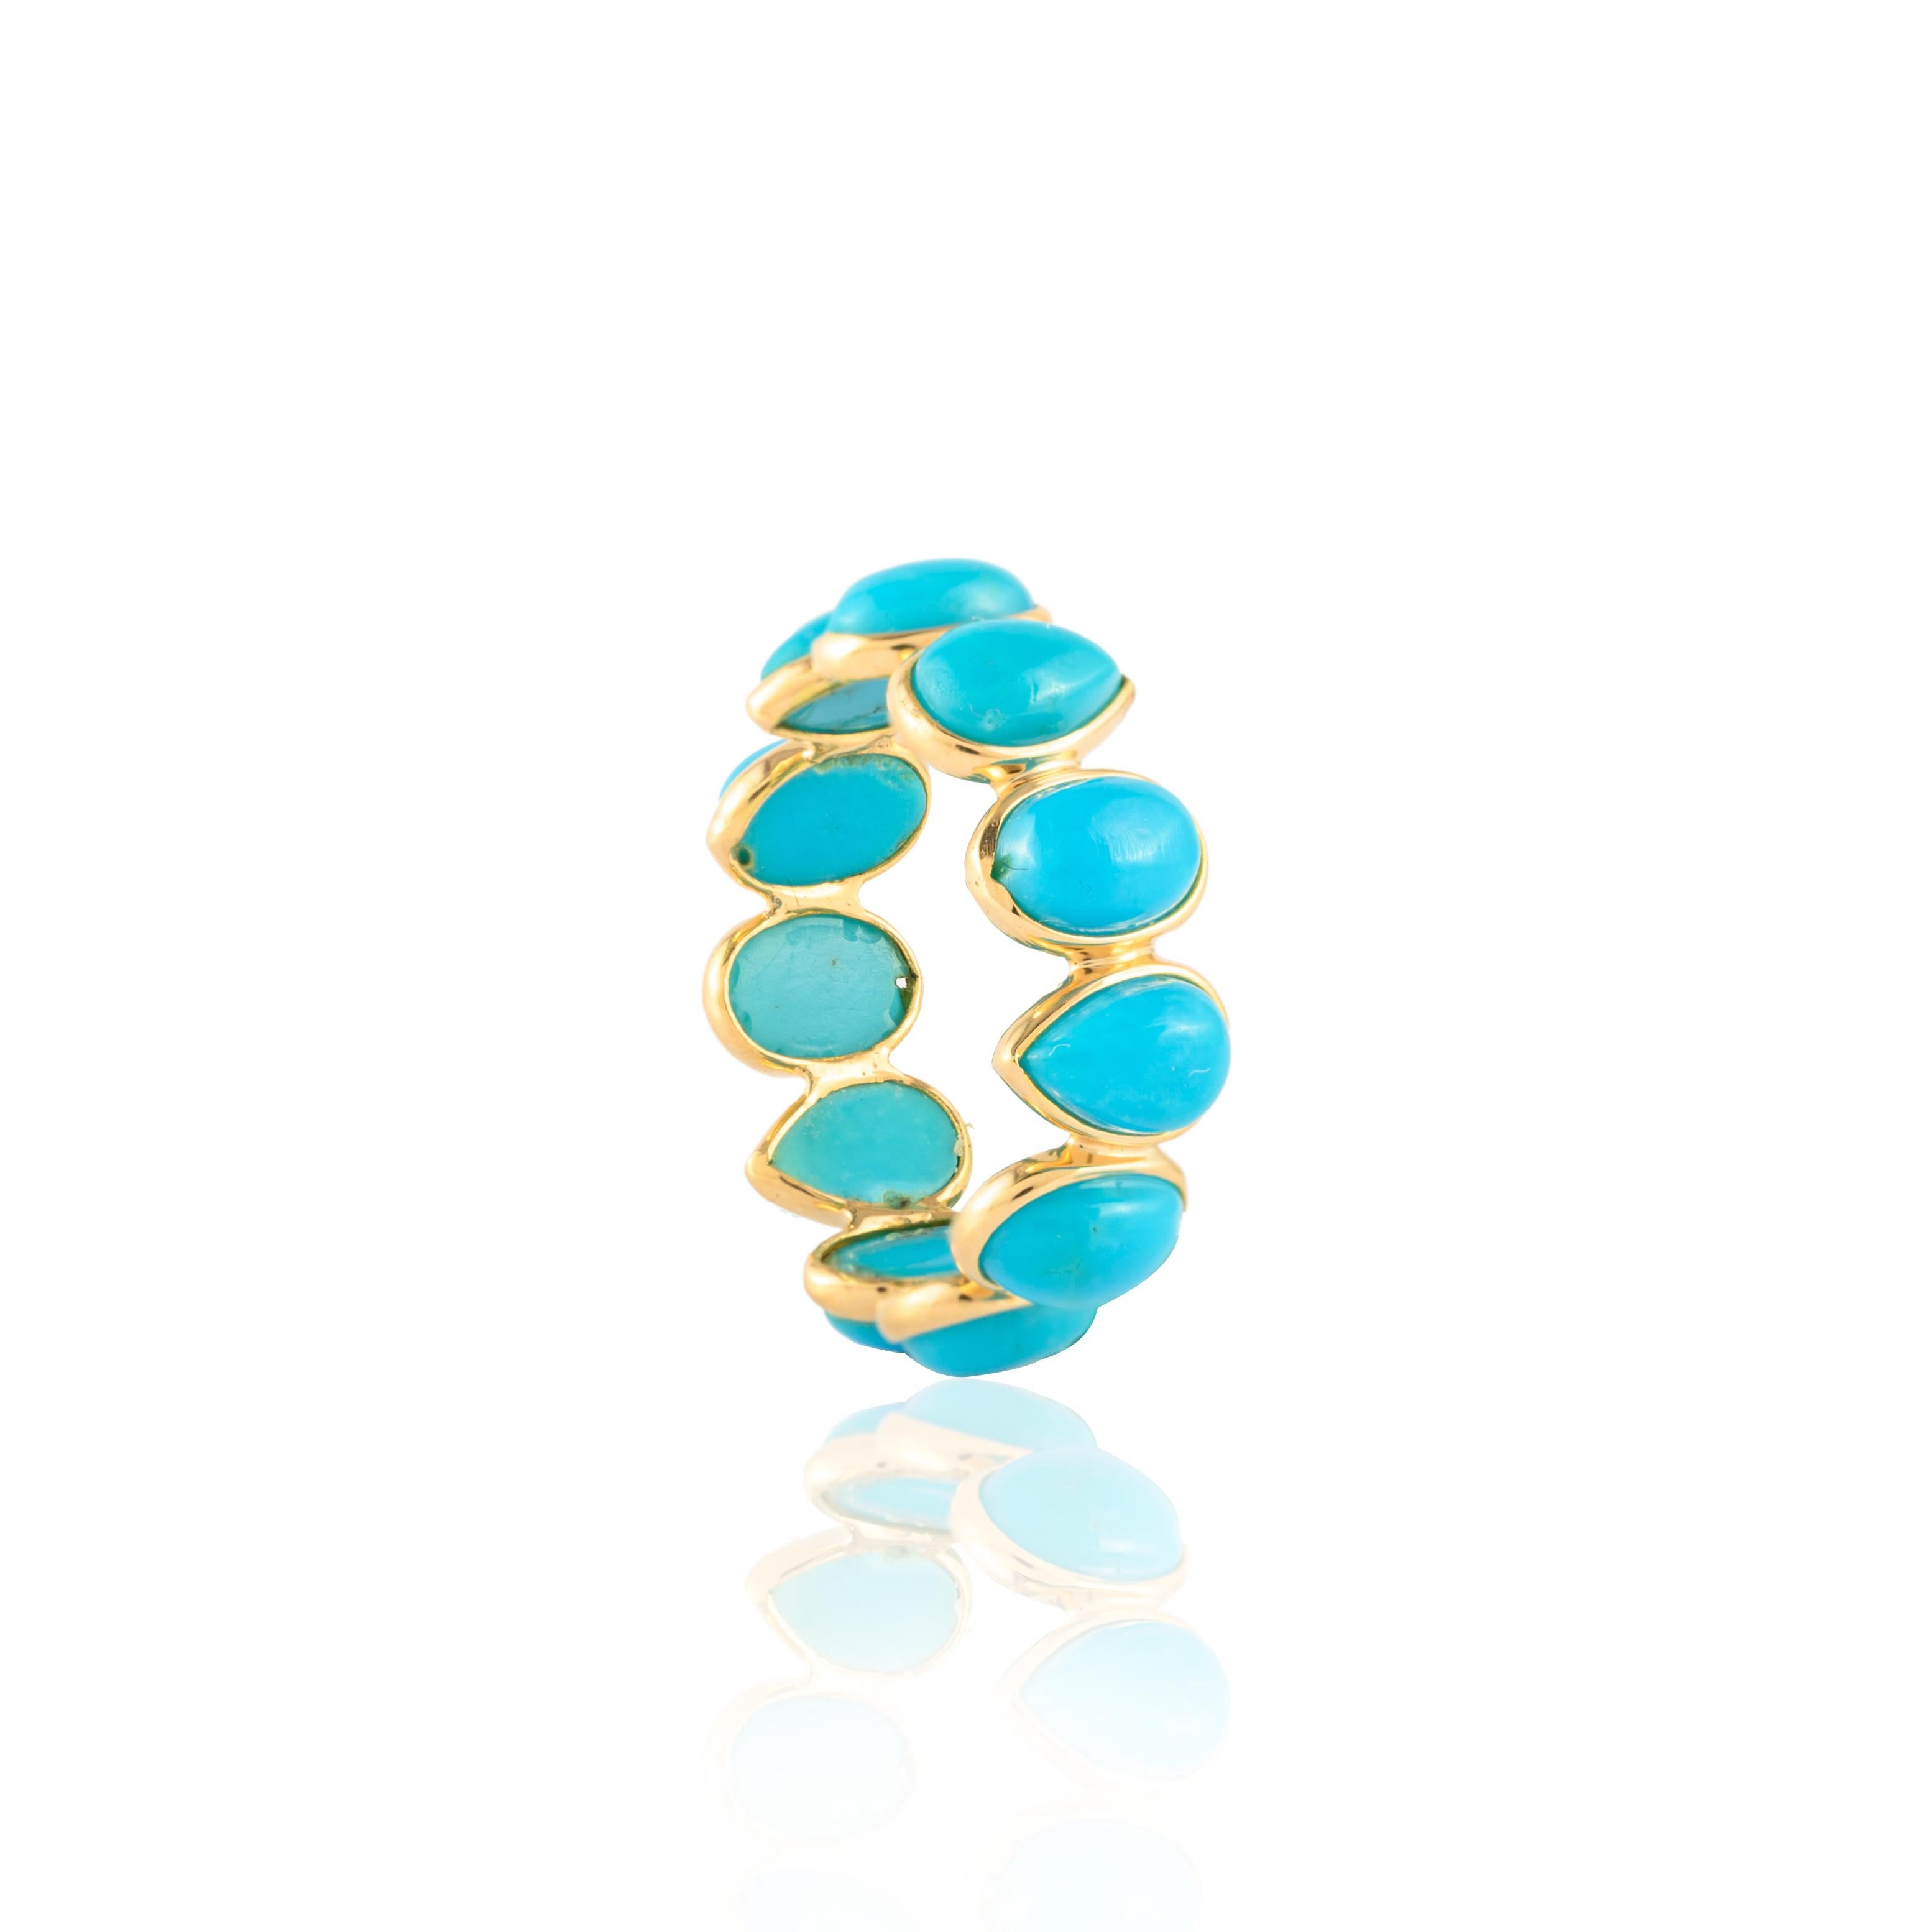 For Sale:  Minimal 18k Yellow Gold 6.2 Carat Turquoise Eternity Band Ring 8